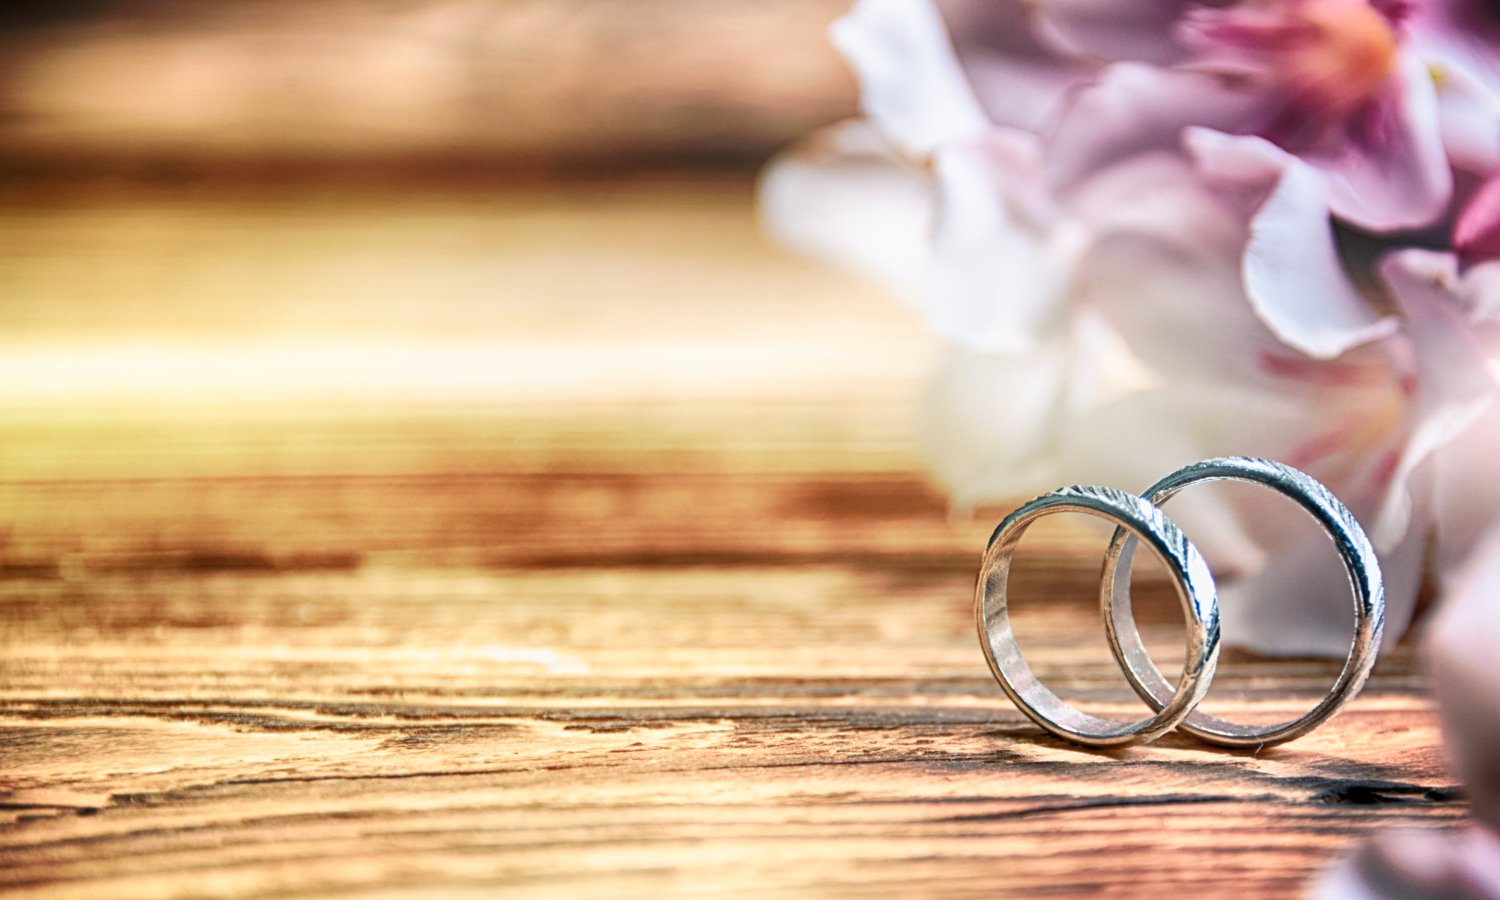  wedding rings on the wooden background